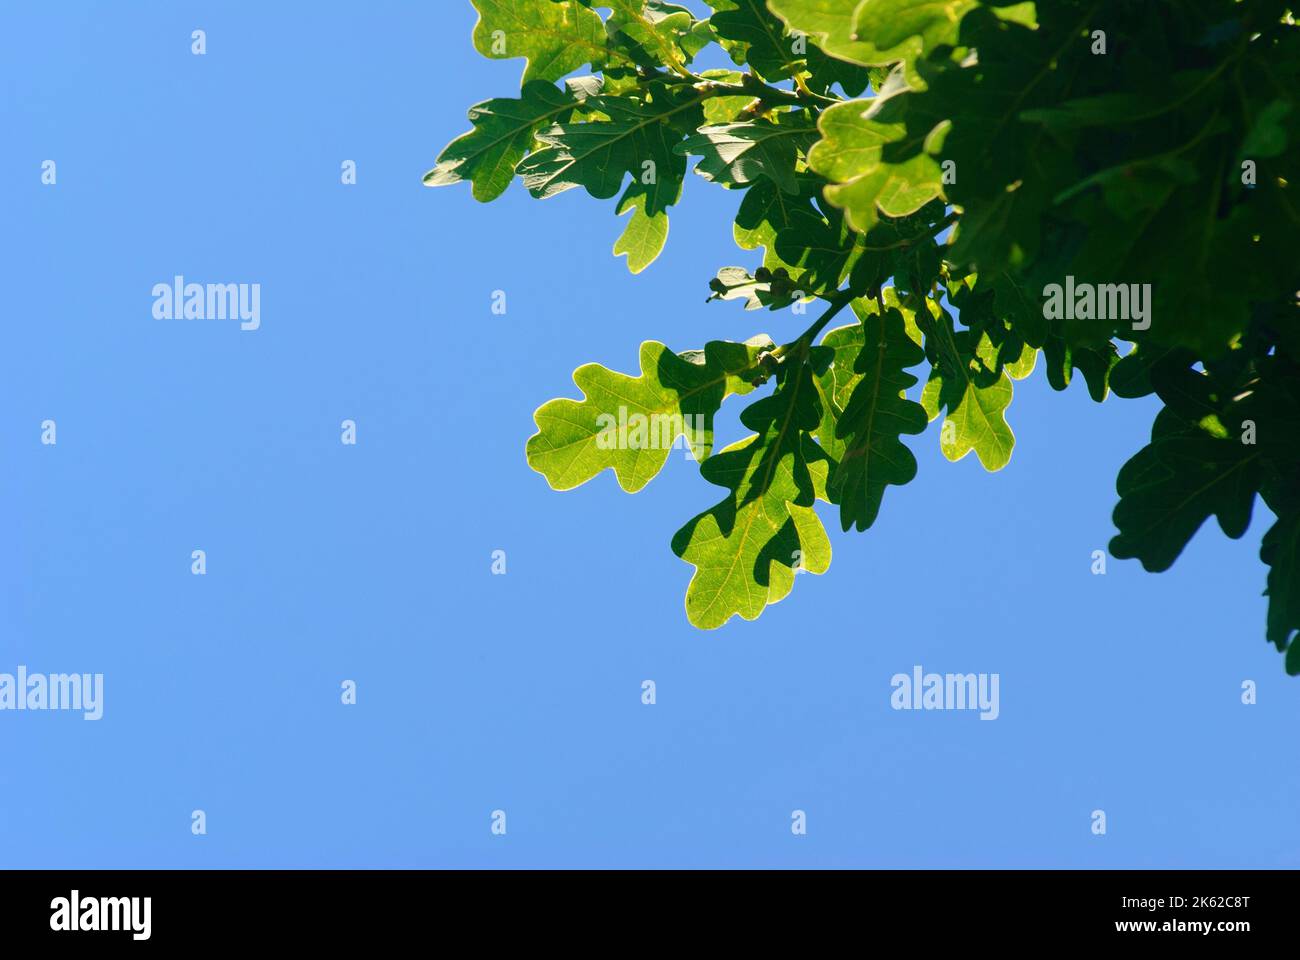 Oak leaves with rim lighting, against a blue sky Stock Photo